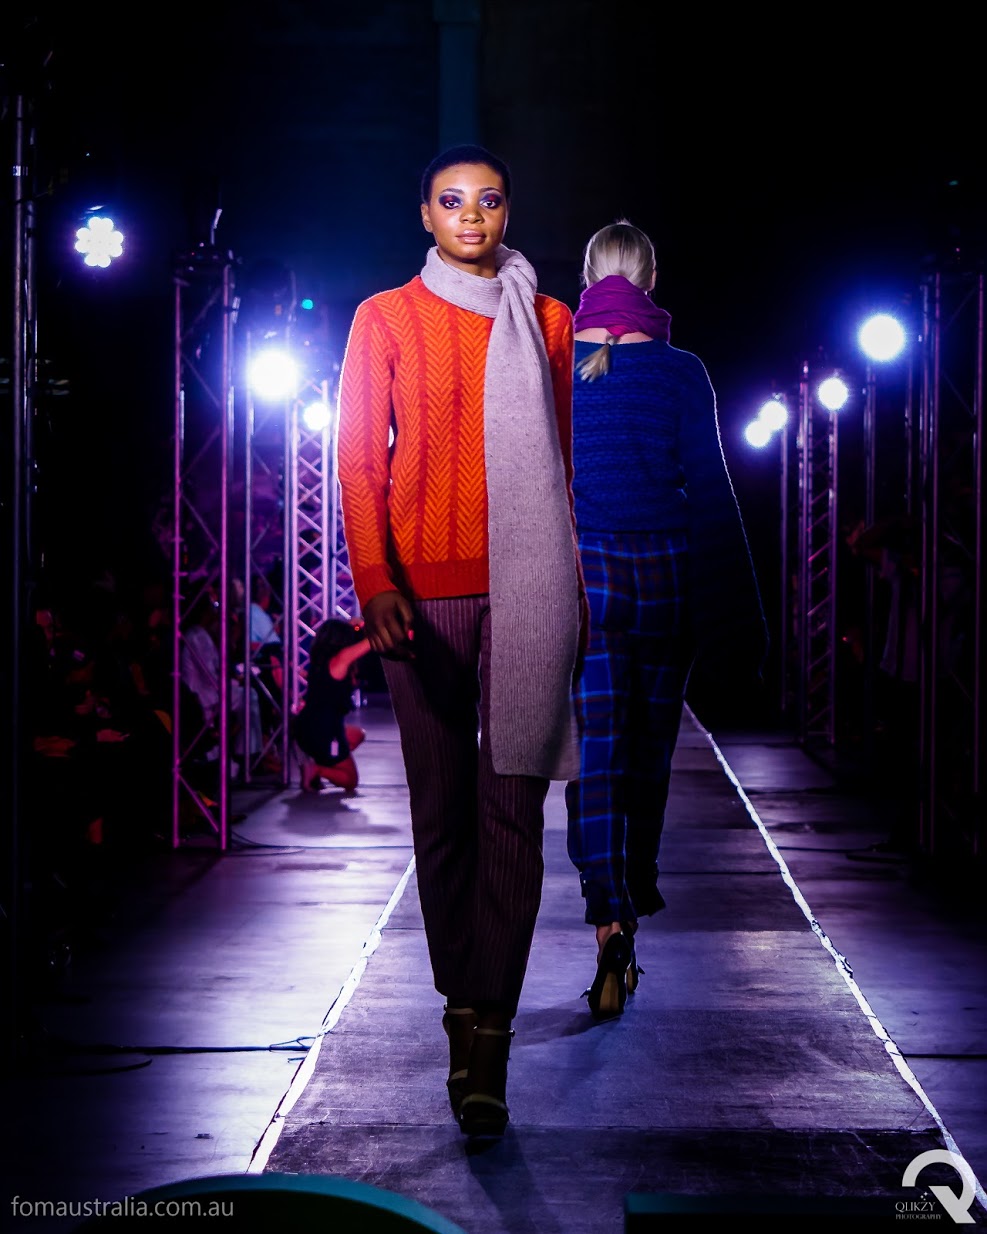 Anne McConnell's knitwear on the runway at FOMA 2019